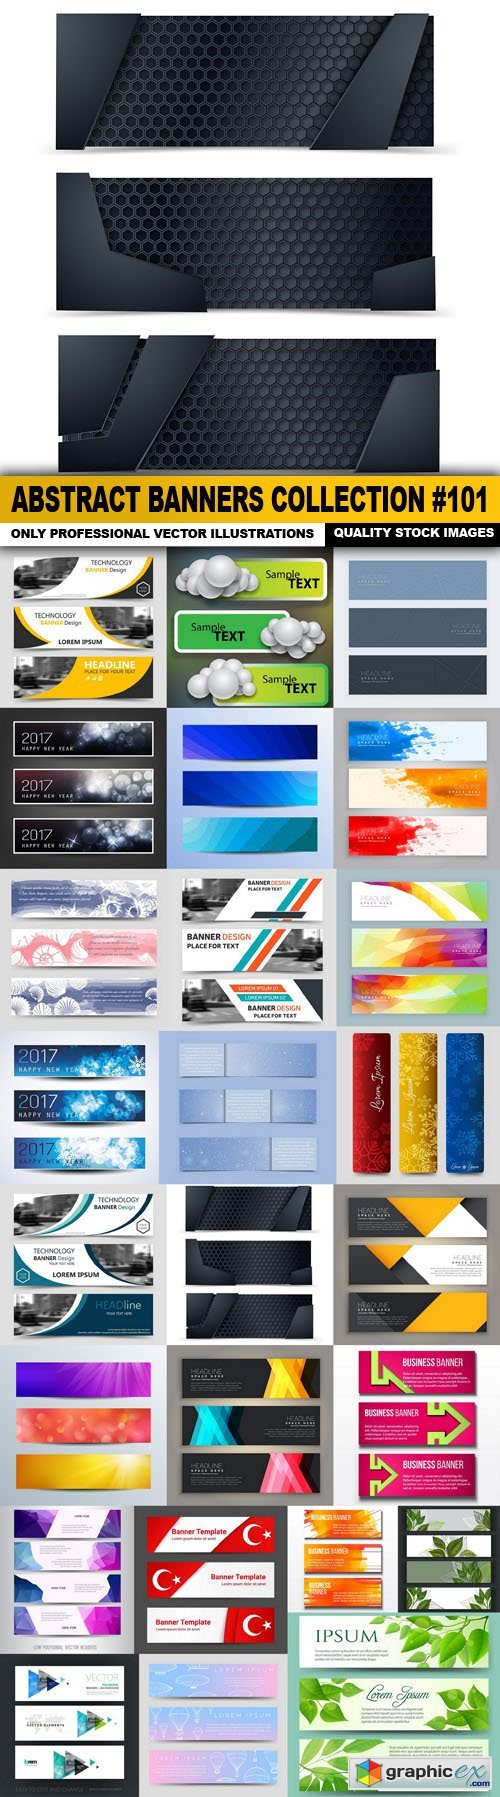 Abstract Banners Collection #101 - 25 Vectors